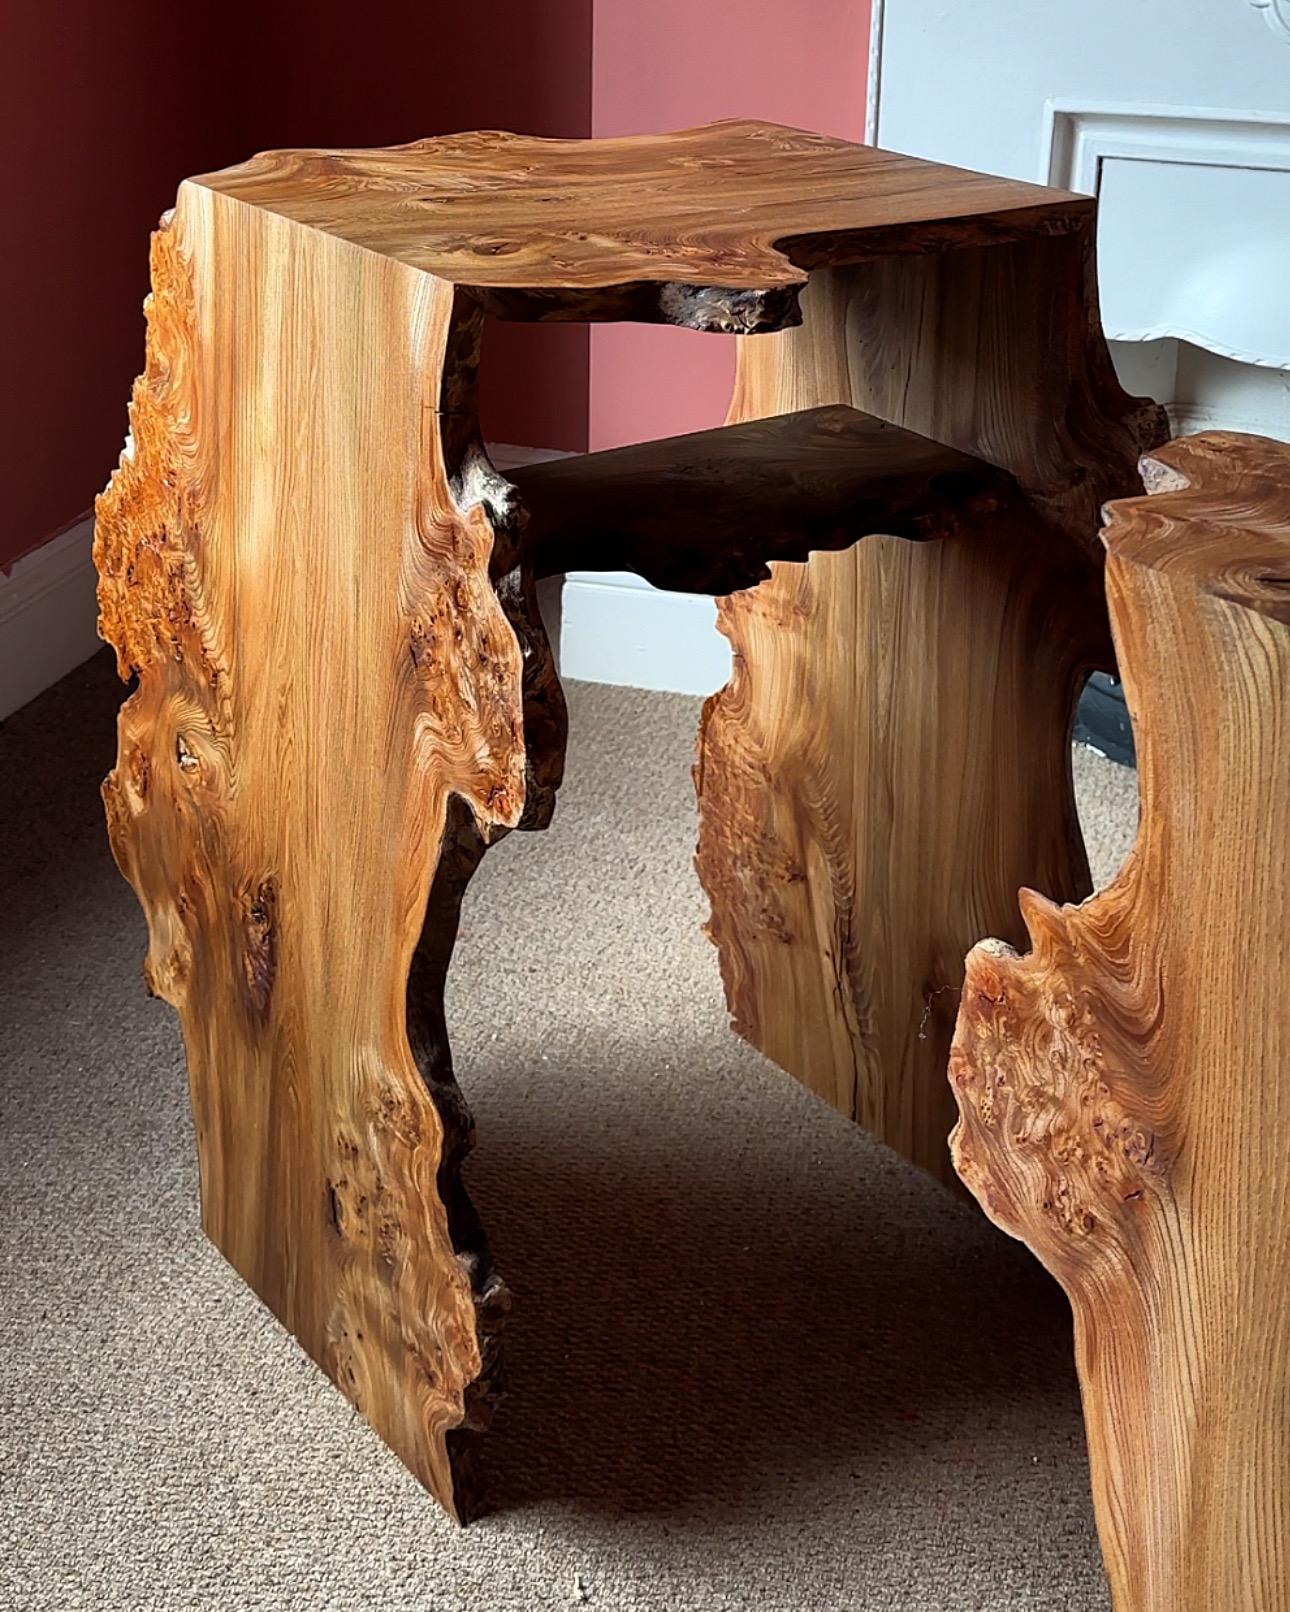 The Burr Elm waterfall bedside table / night stand is made up of one singular waney edge board. 
The board is cut into three pieces, then re-joined at 45 degree angles so that the grain and detail on each piece flows and interconnects from one side